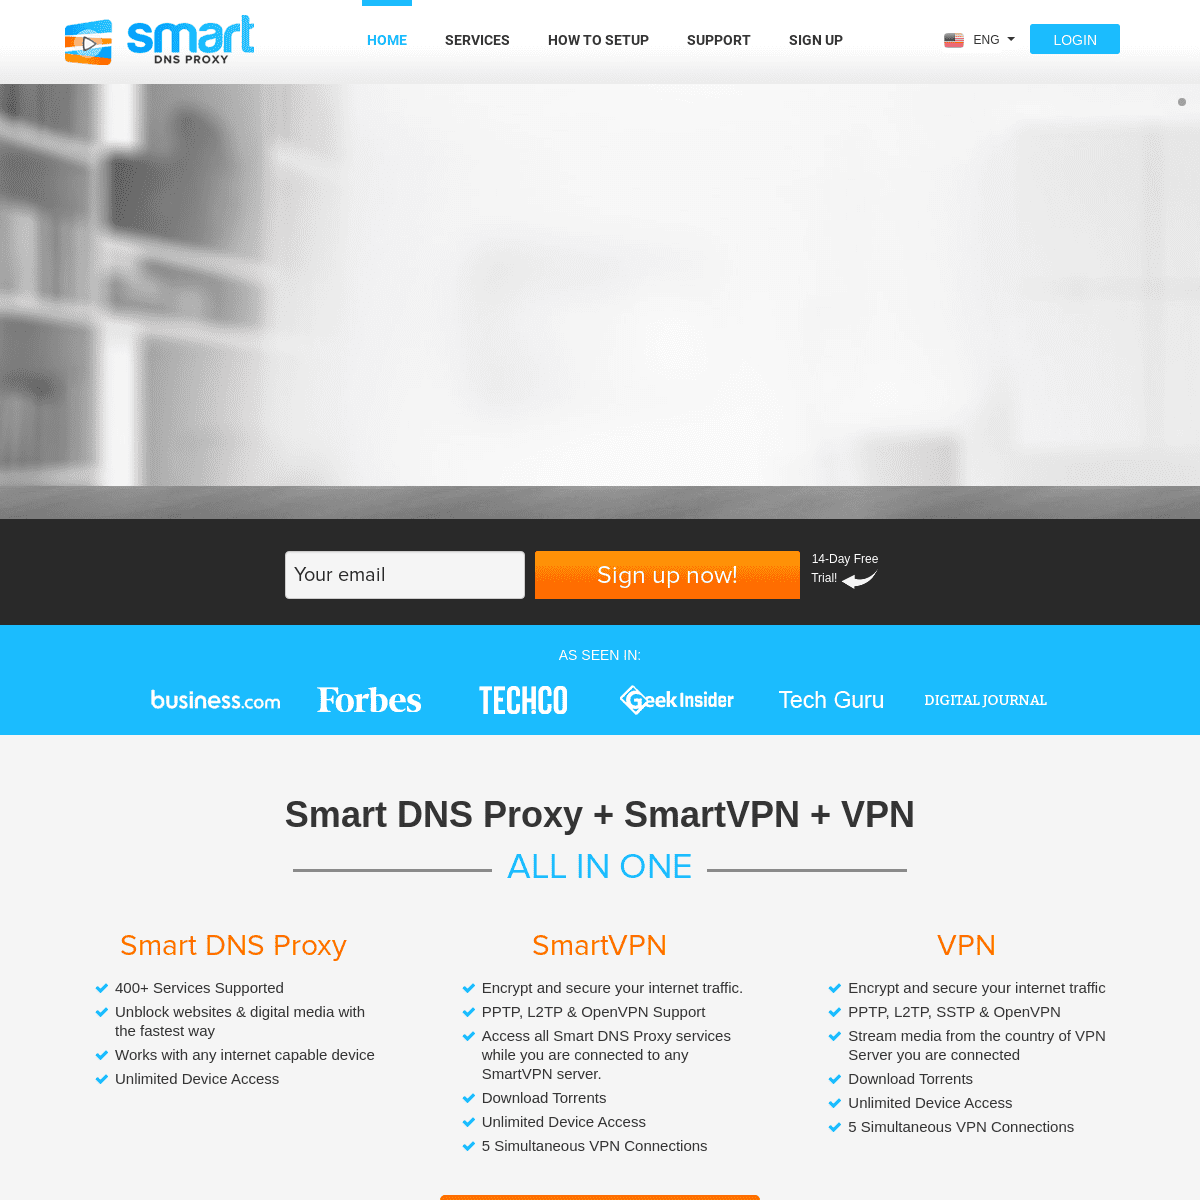 A complete backup of https://smartdnsproxy.com